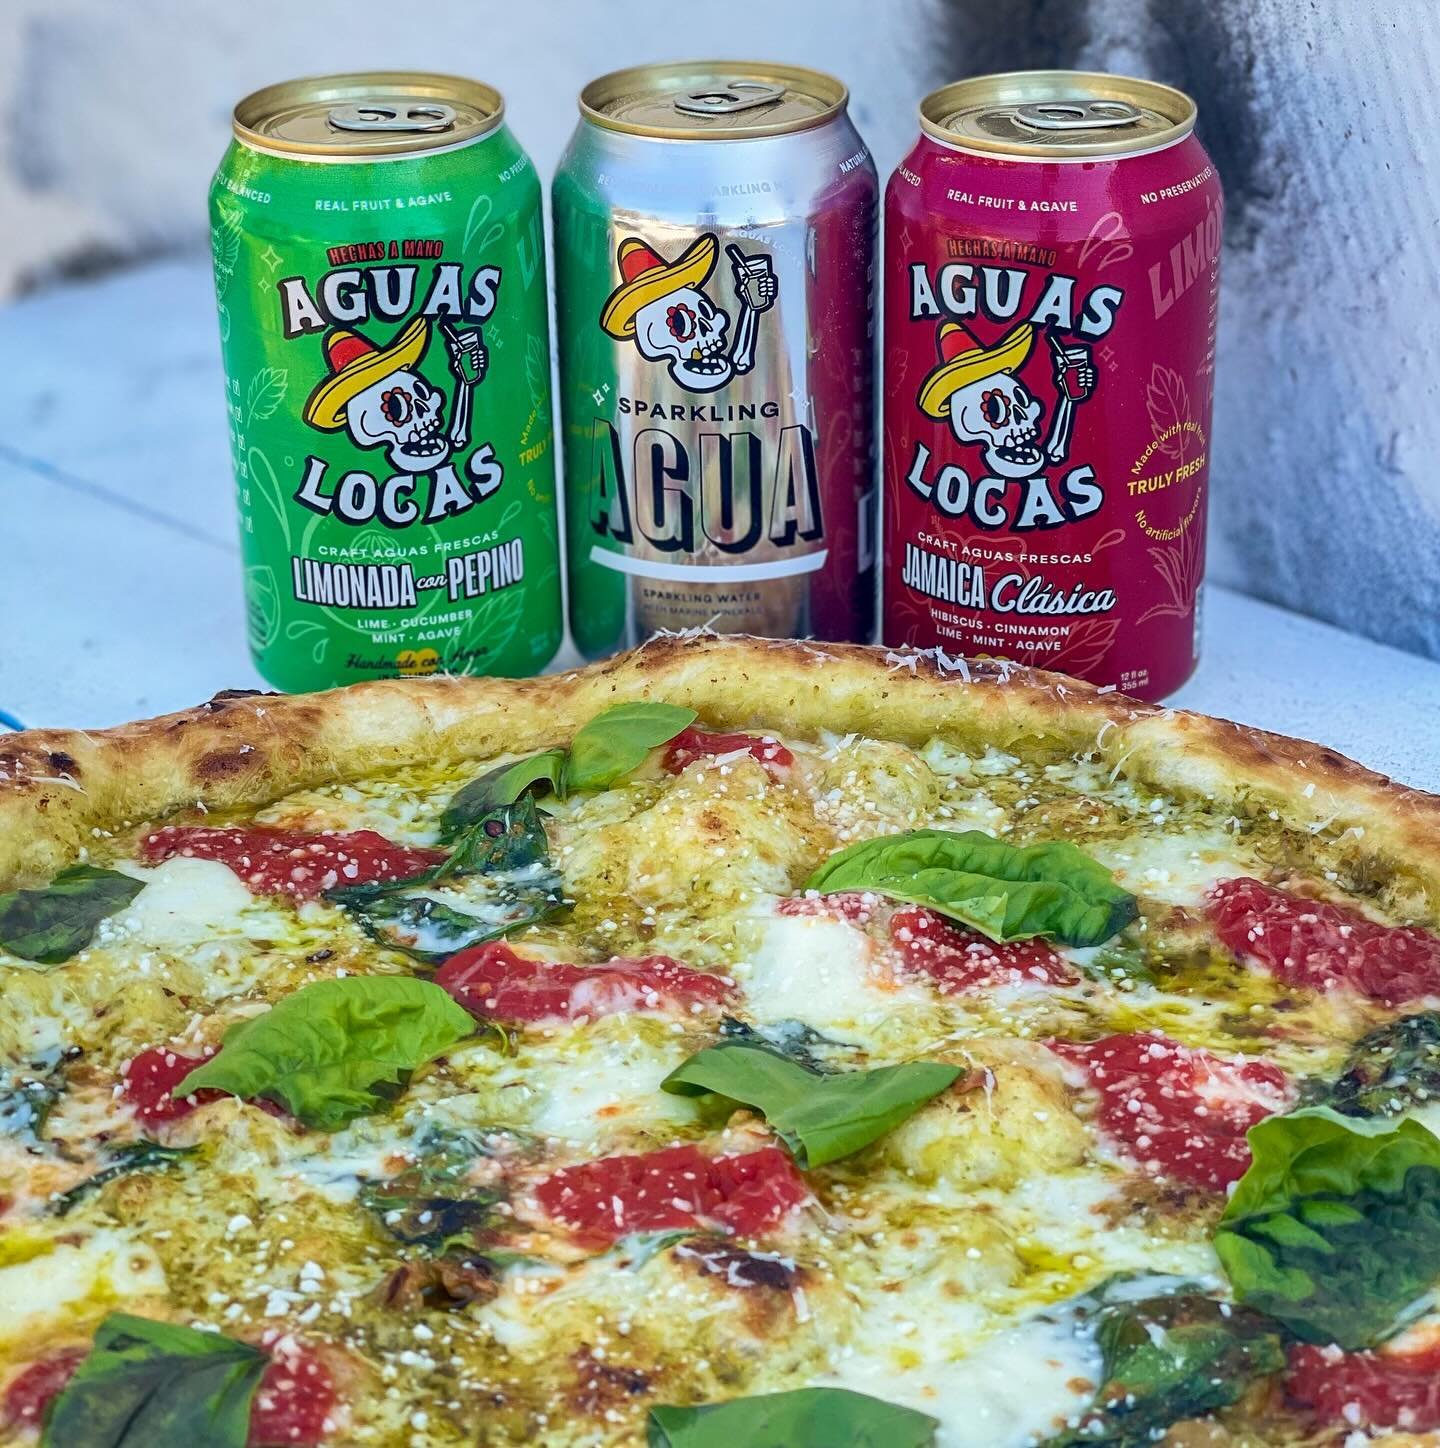 AGUAS LOCAS IN THE HOUSE

We&rsquo;re so excited to announce that @drinkaguaslocas have joined our menu! Crafted with authentic flavors and wholesome, all-natural ingredients, these craft aguas frescas are not to be missed!

We love showcasing our fr